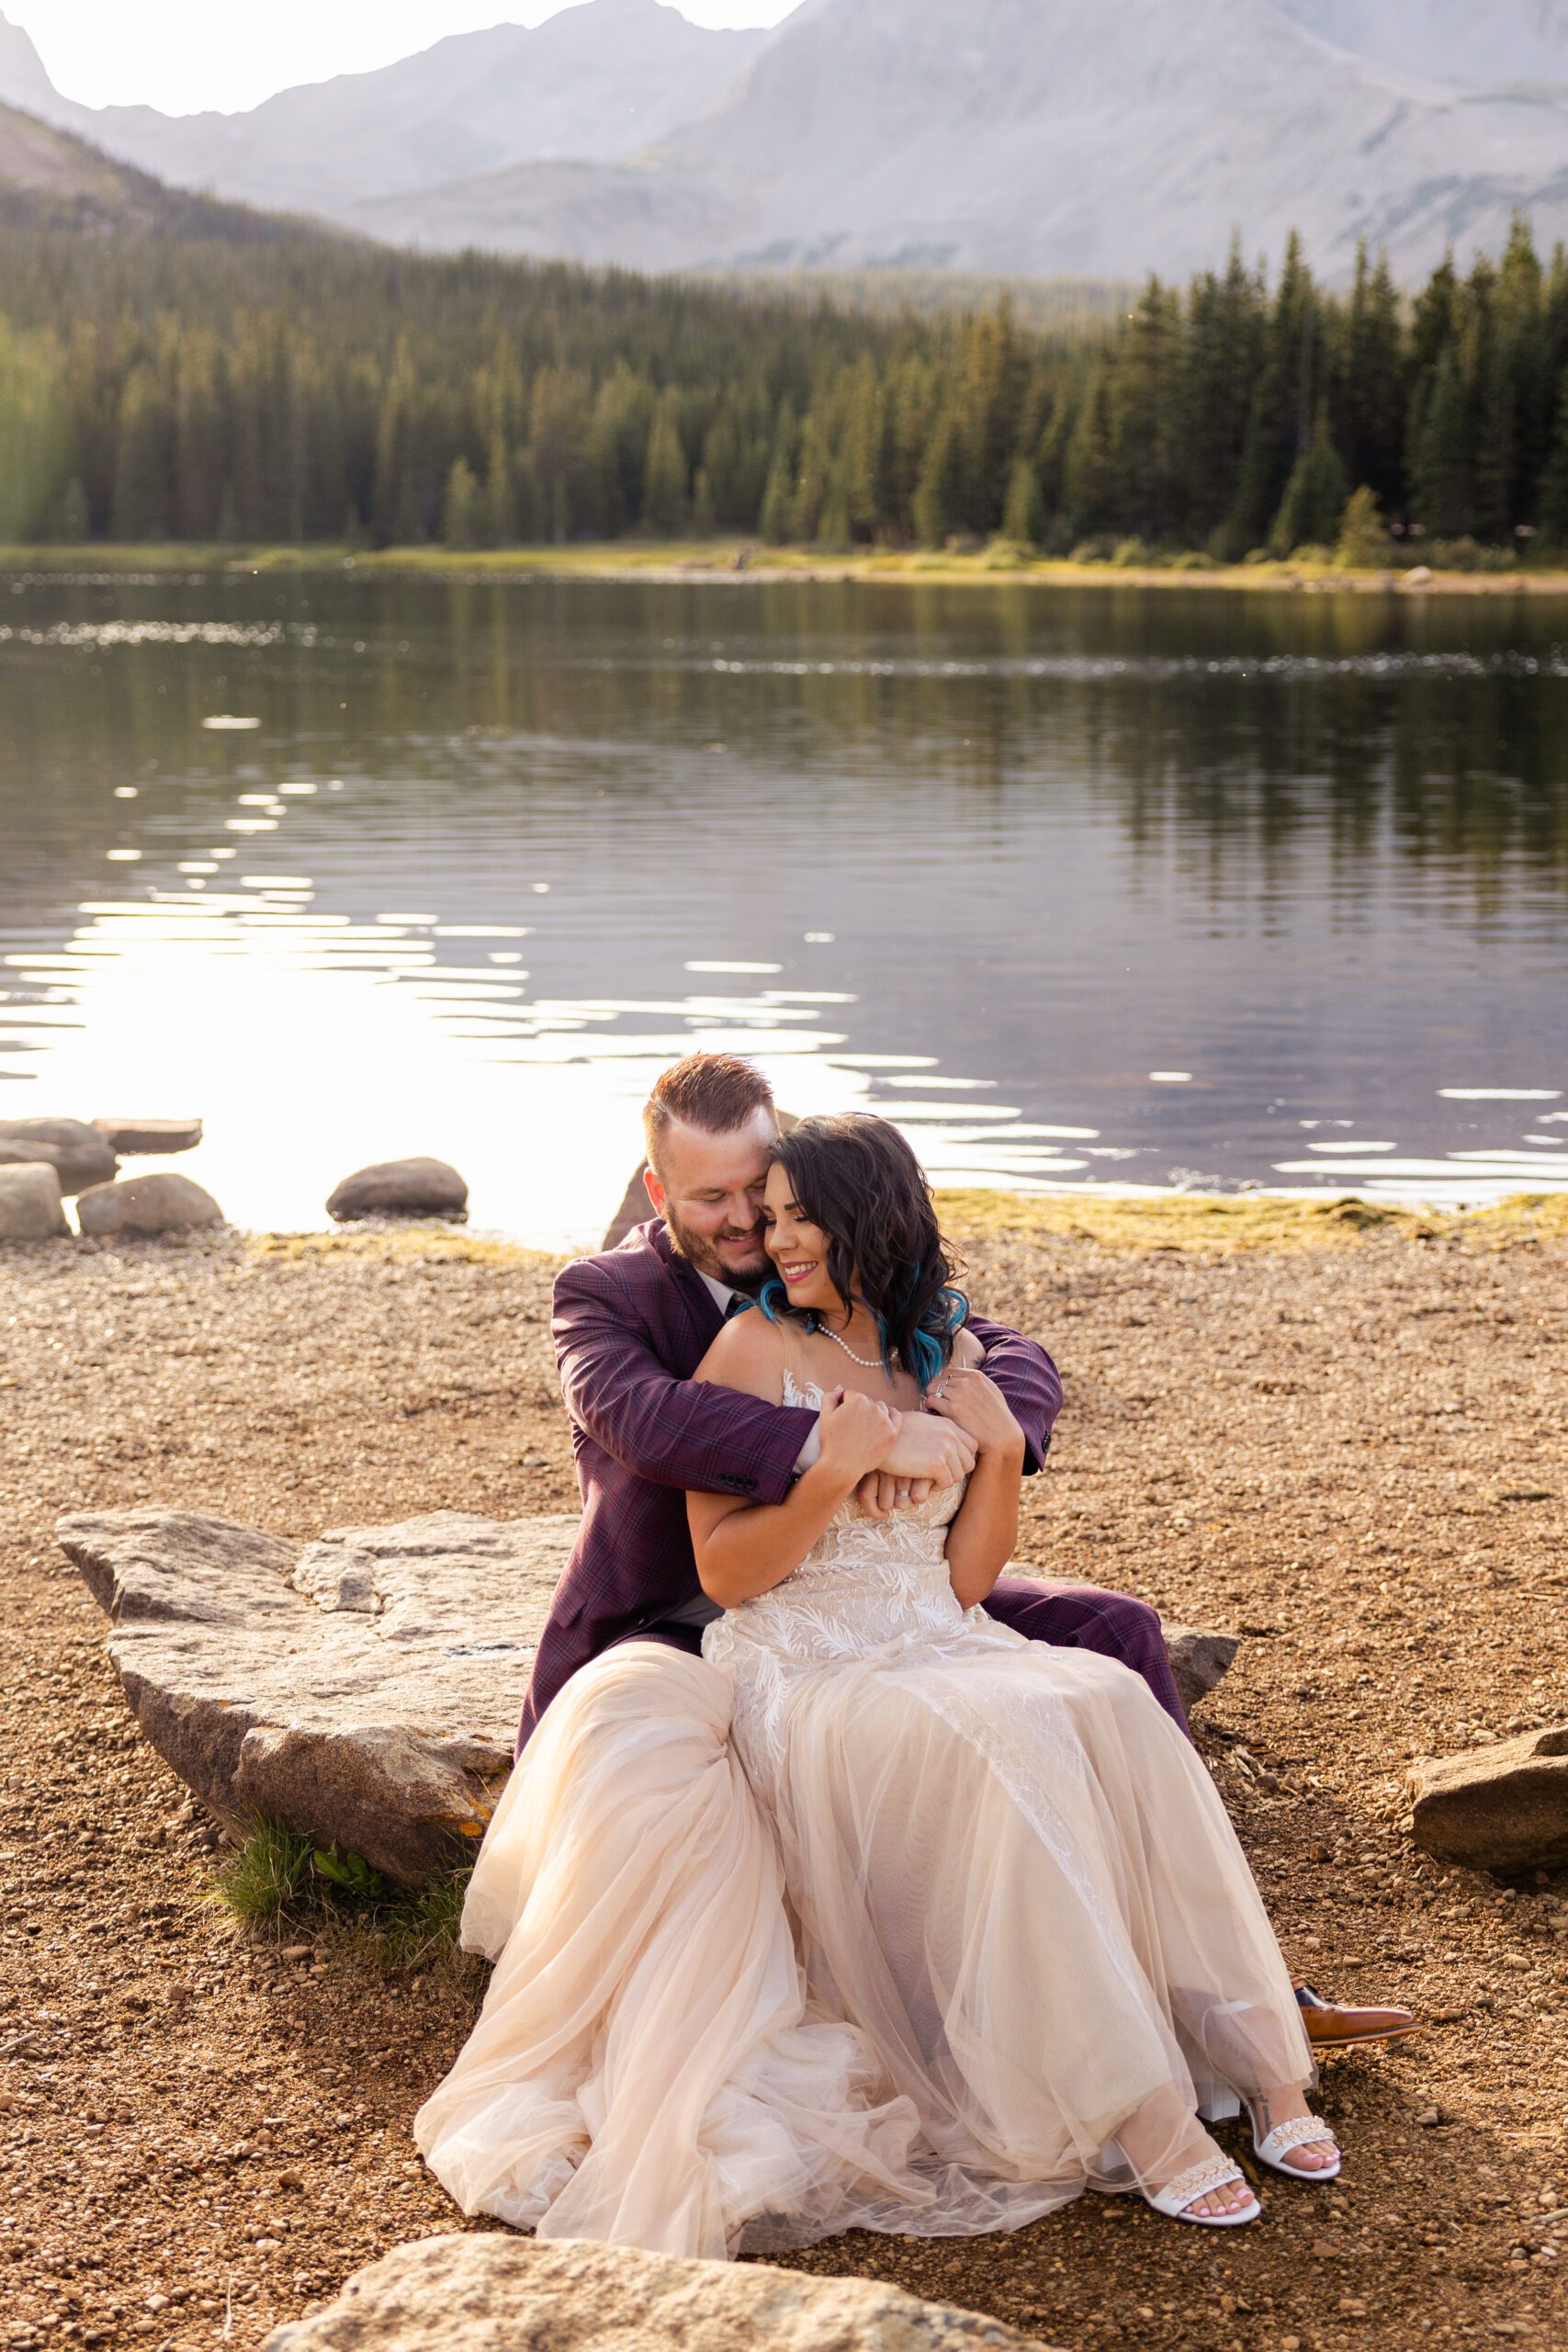 the bride and groom sitting together on a rock near the lake, wrapped up in eachothers arms after their Brainard Lake Elopement.